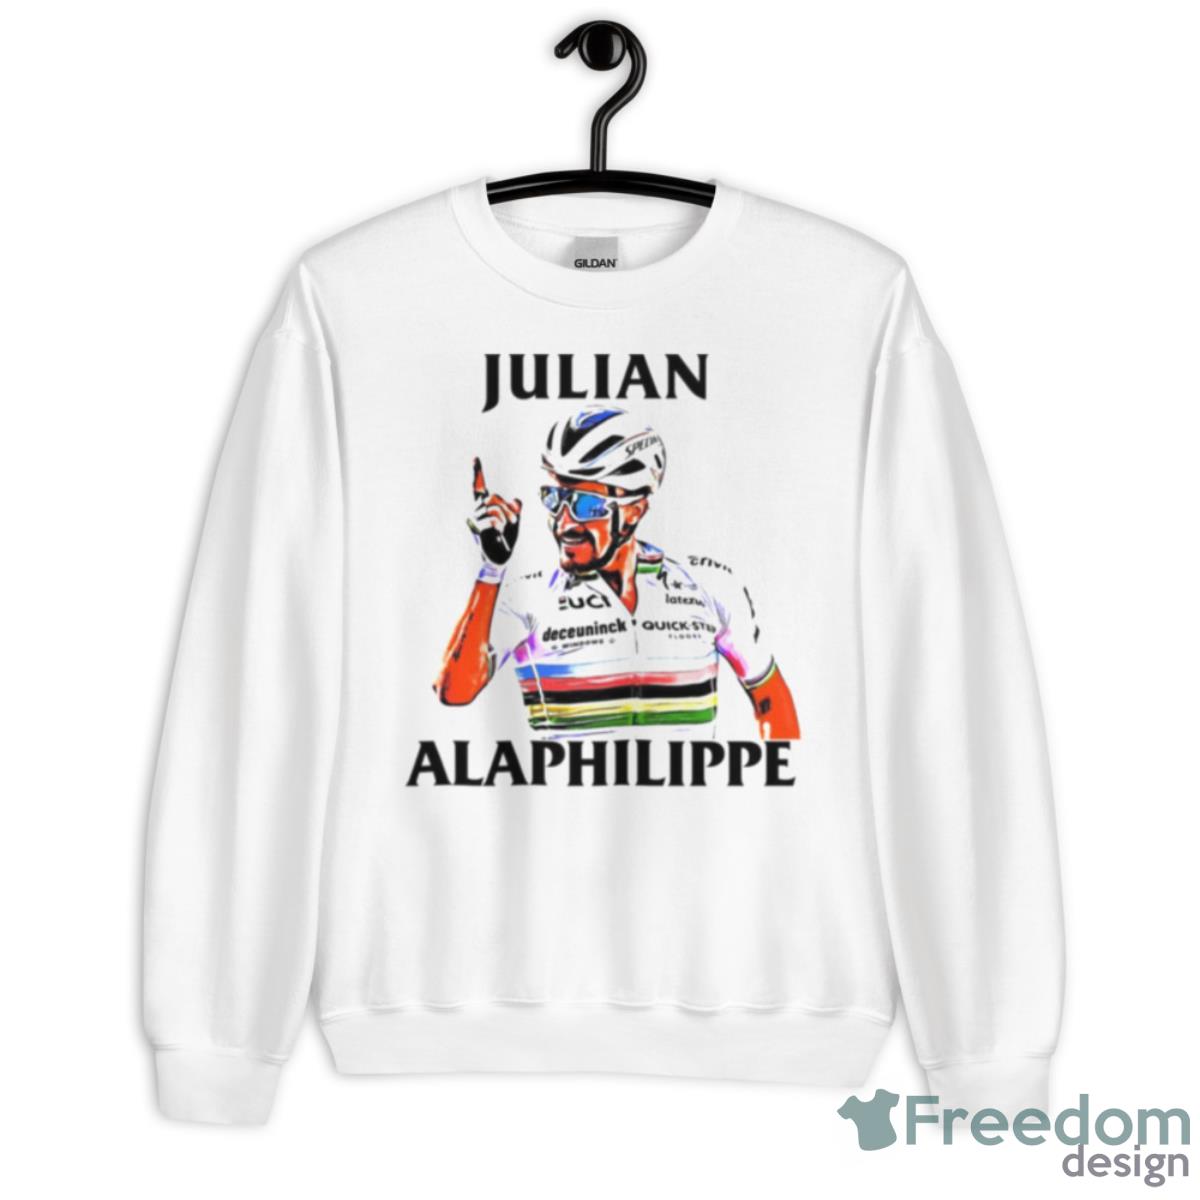 Julian Alaphilippe Cycle For Life Shirt